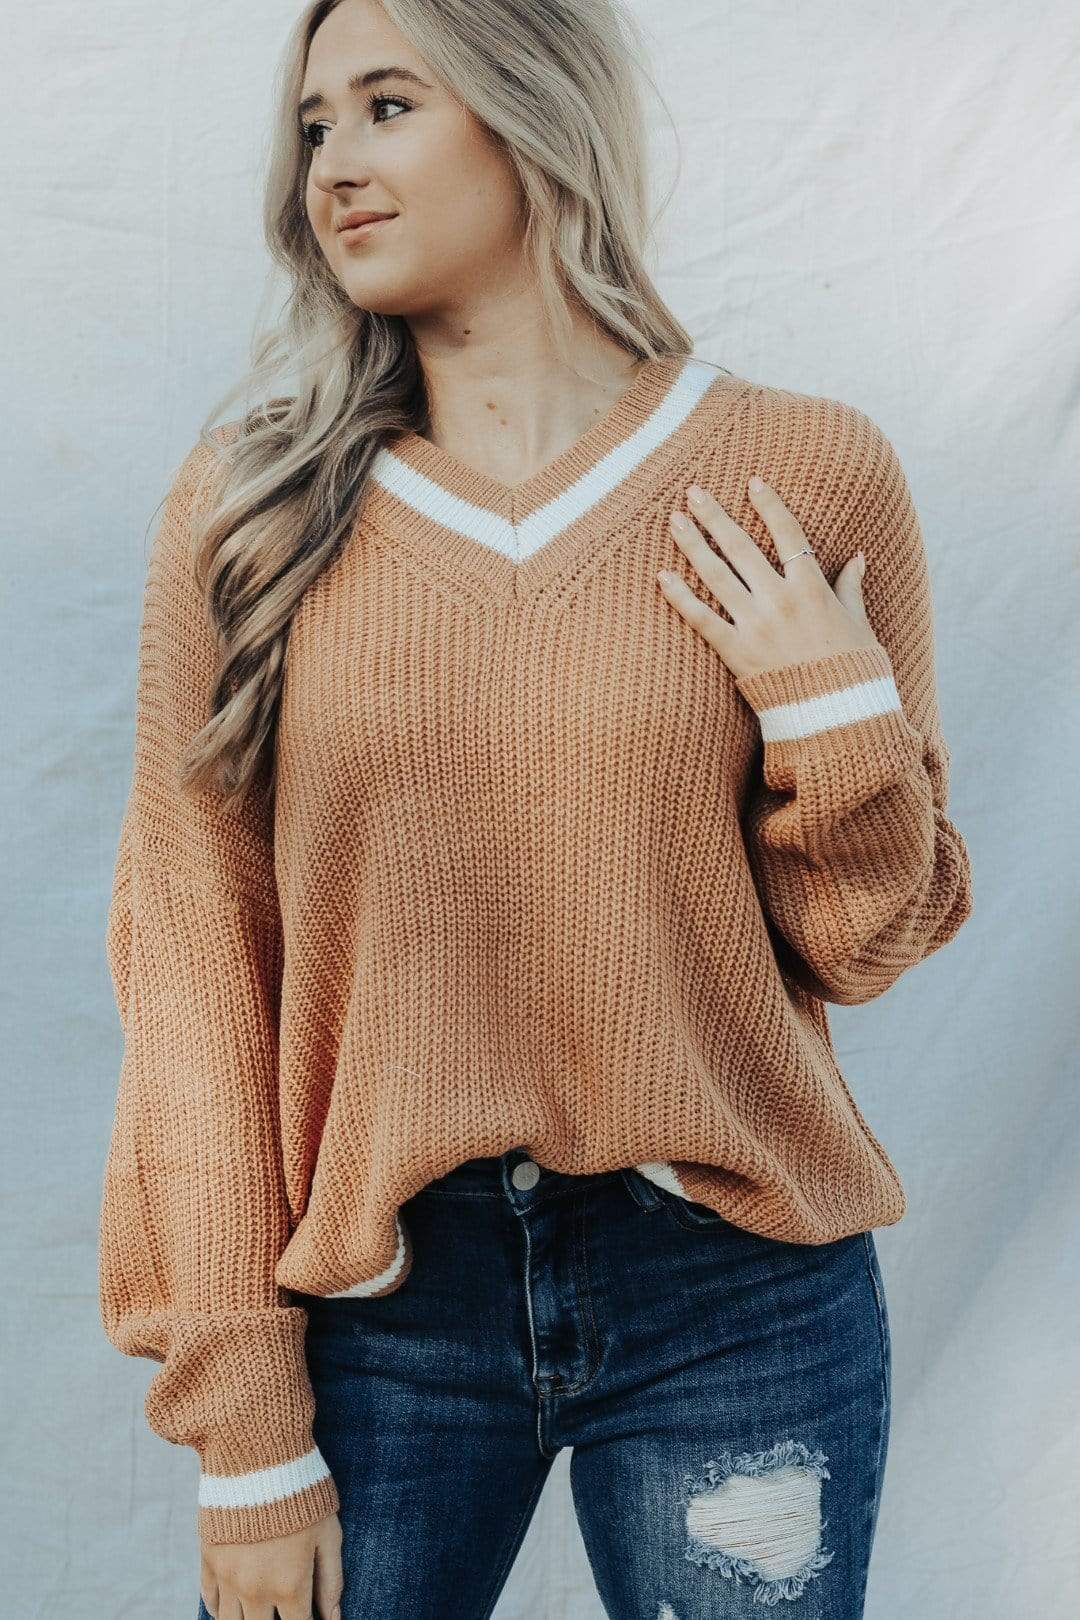 Let's Get Toasty Knit Sweater - Select Trends Boutique